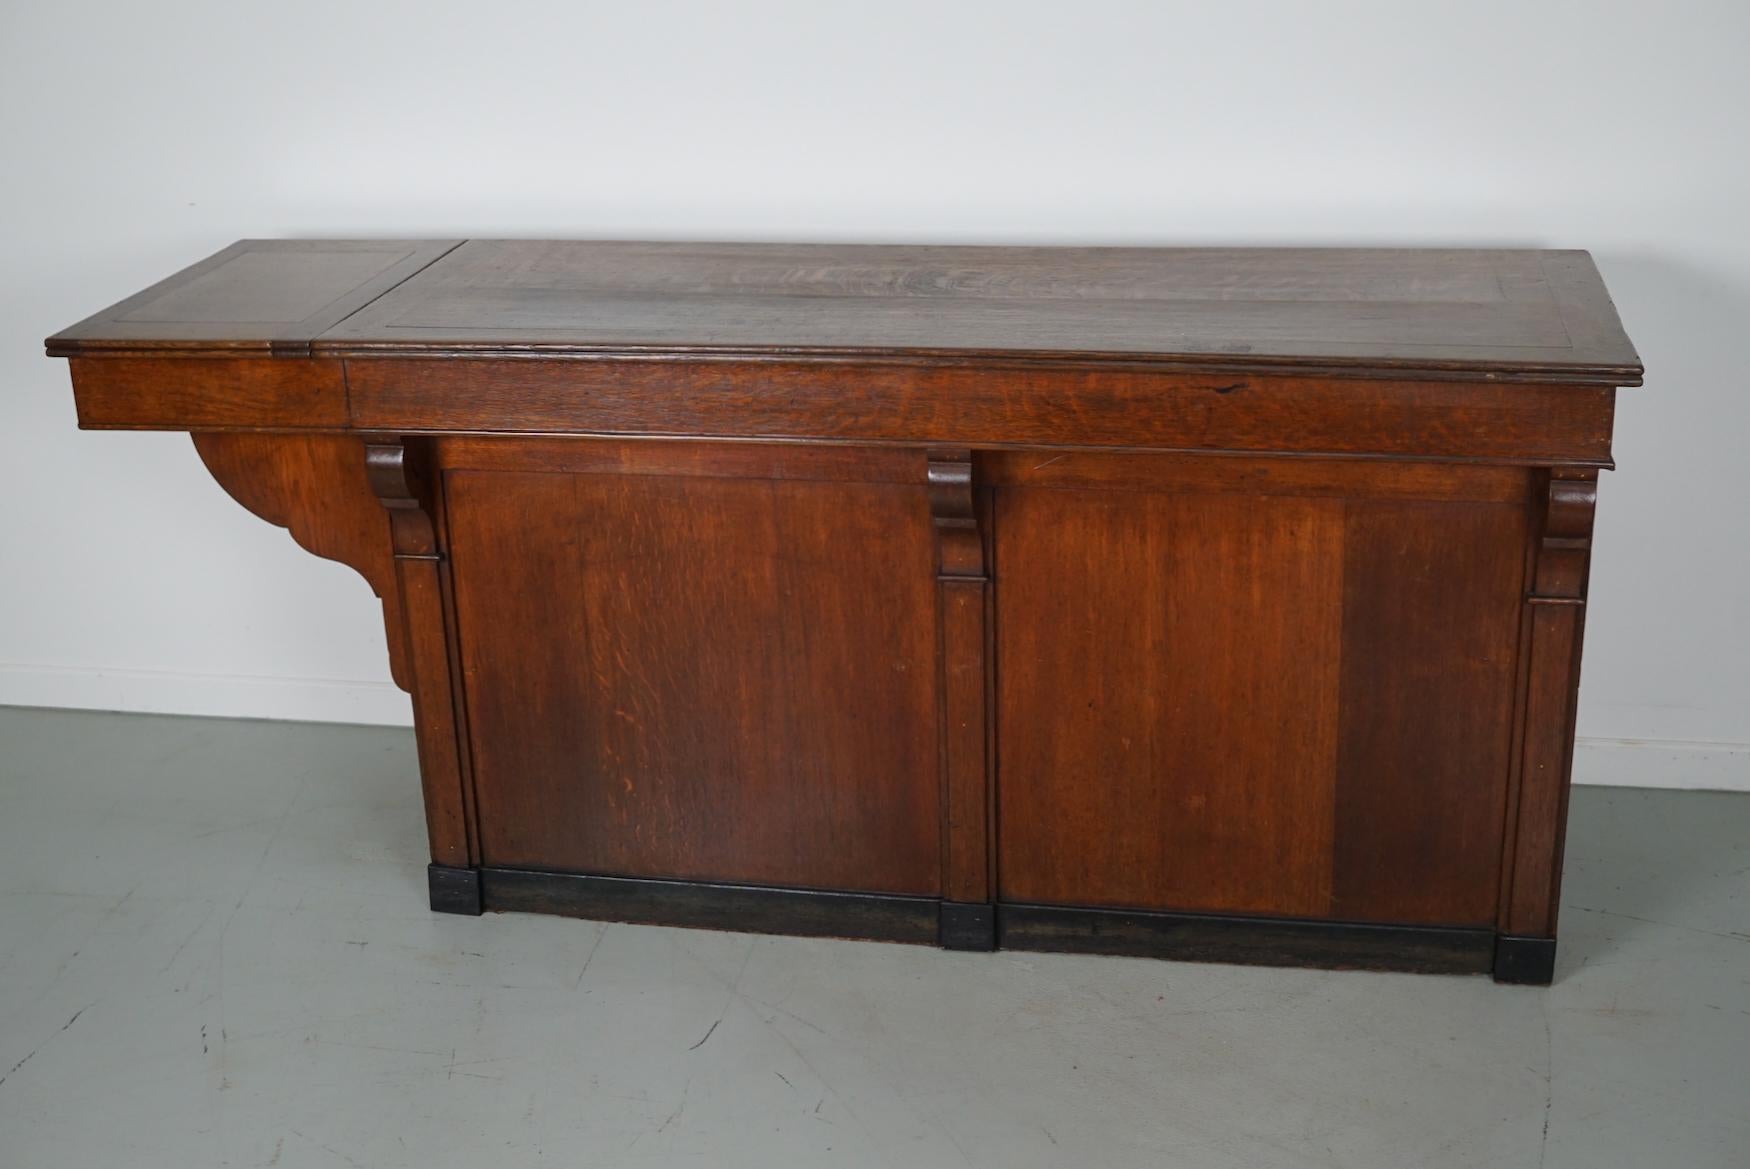 This antique oak shop counter dates from the turn of the century and was made in France. It features an oak paneled frame and four drawers. This shop counter could also be used as a kitchen island / workstation. The interior dimensions of the